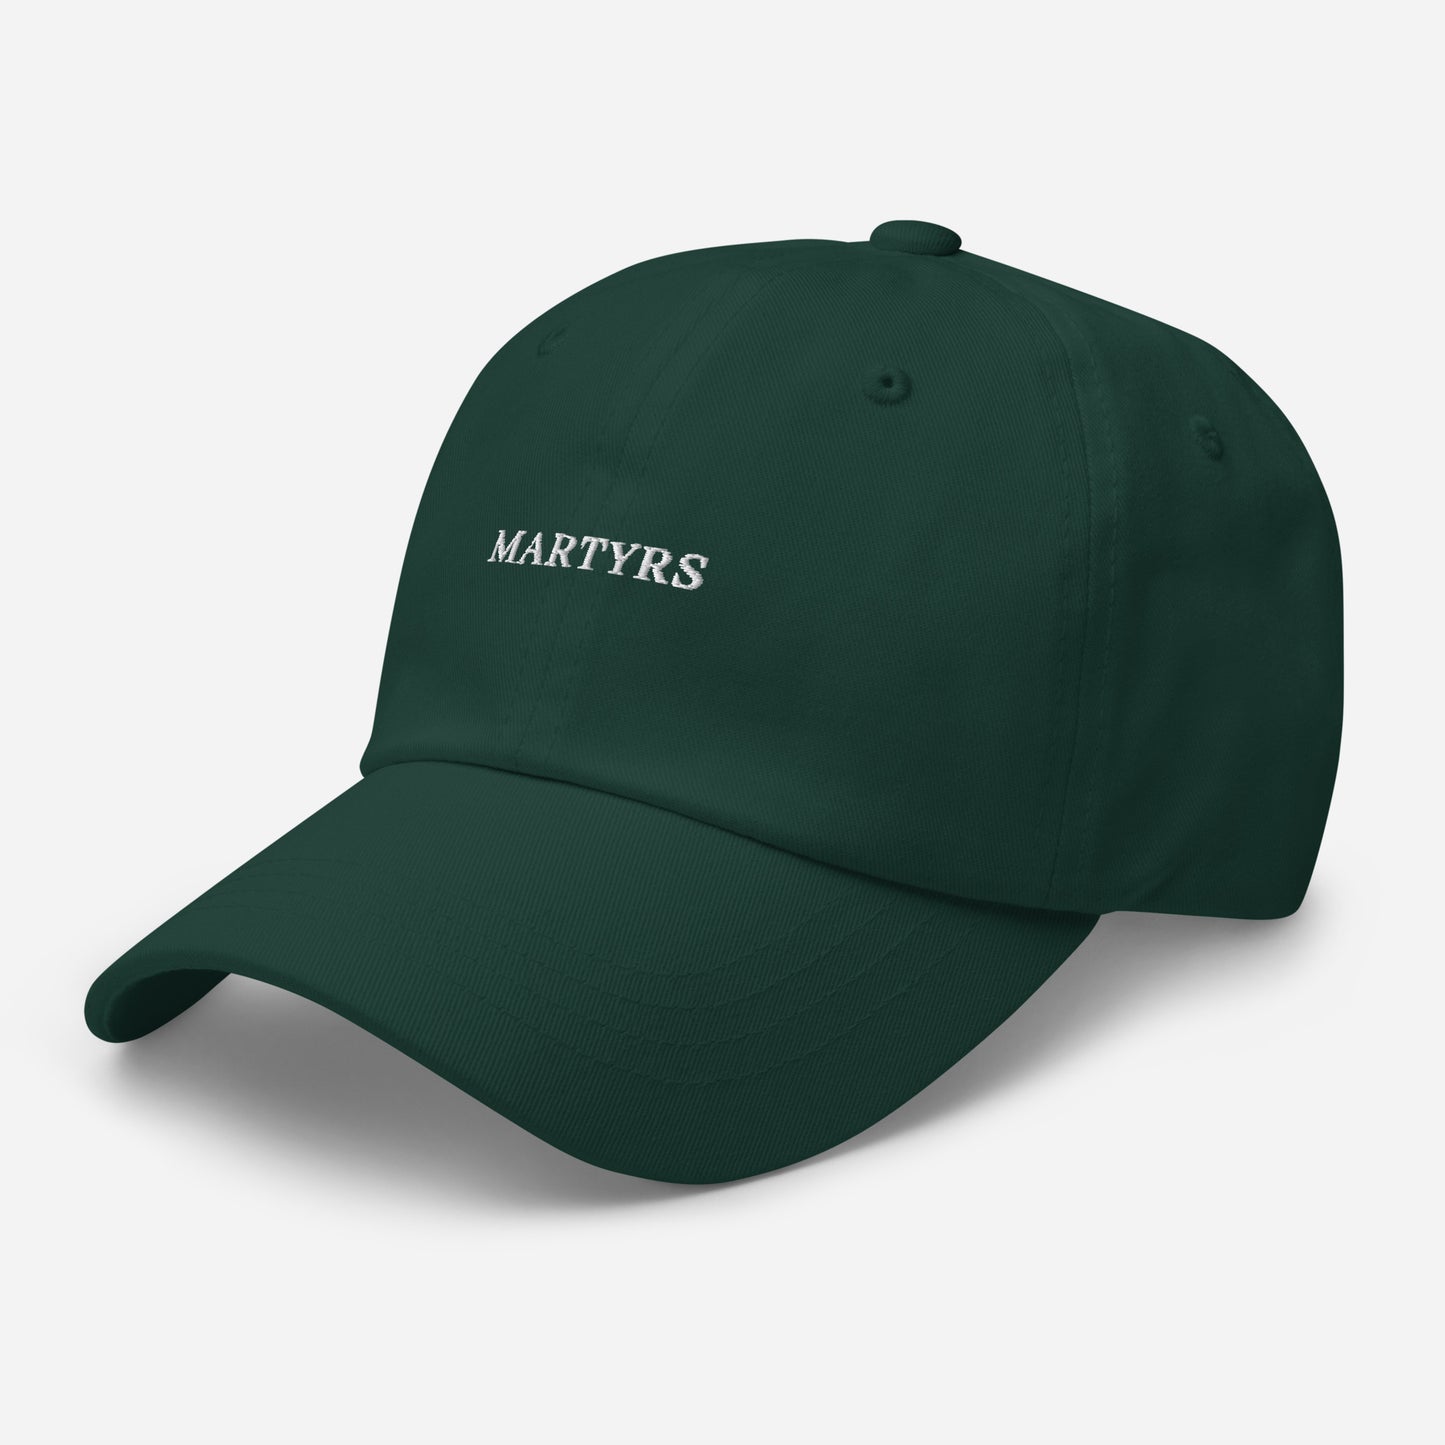 Martyrs - SPRUCE Classic Dad hat - WHITE FONT broderie